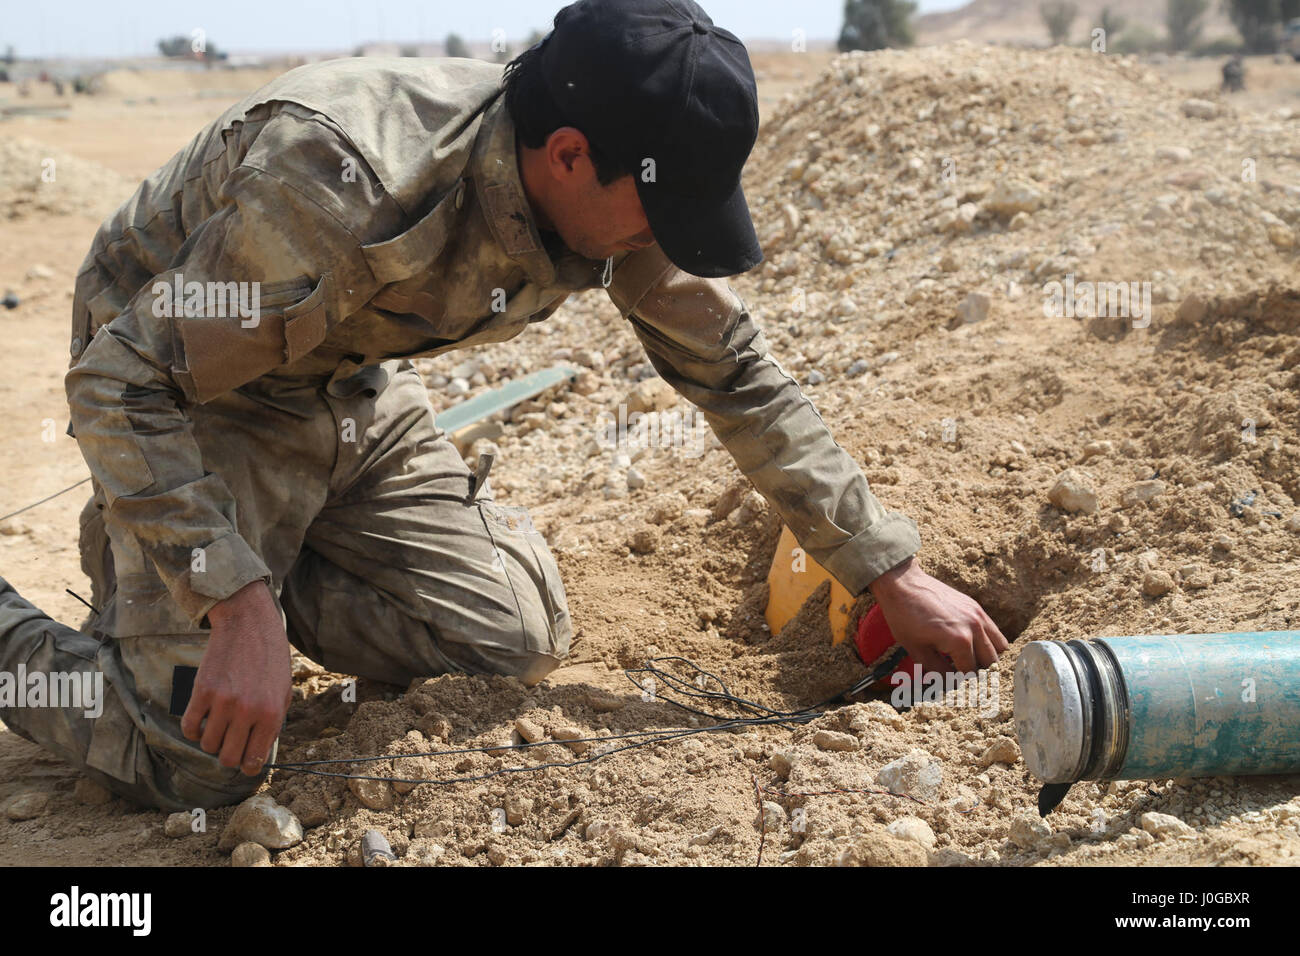 An Iraqi security forces soldier sets up a cutting tool system to safely remove a simulated improvised explosive device during counter-IED training at Al Asad Air Base, Iraq, March 29, 2017. This training is part of the overall Combined Joint Task Force – Operation Inherent Resolve building partner capacity mission by training and improving the capability of partnered forces fighting ISIS. CJTF- OIR is the global Coalition to defeat ISIS in Iraq and Syria. (U.S. Army photo by Sgt. Lisa Soy) Stock Photo